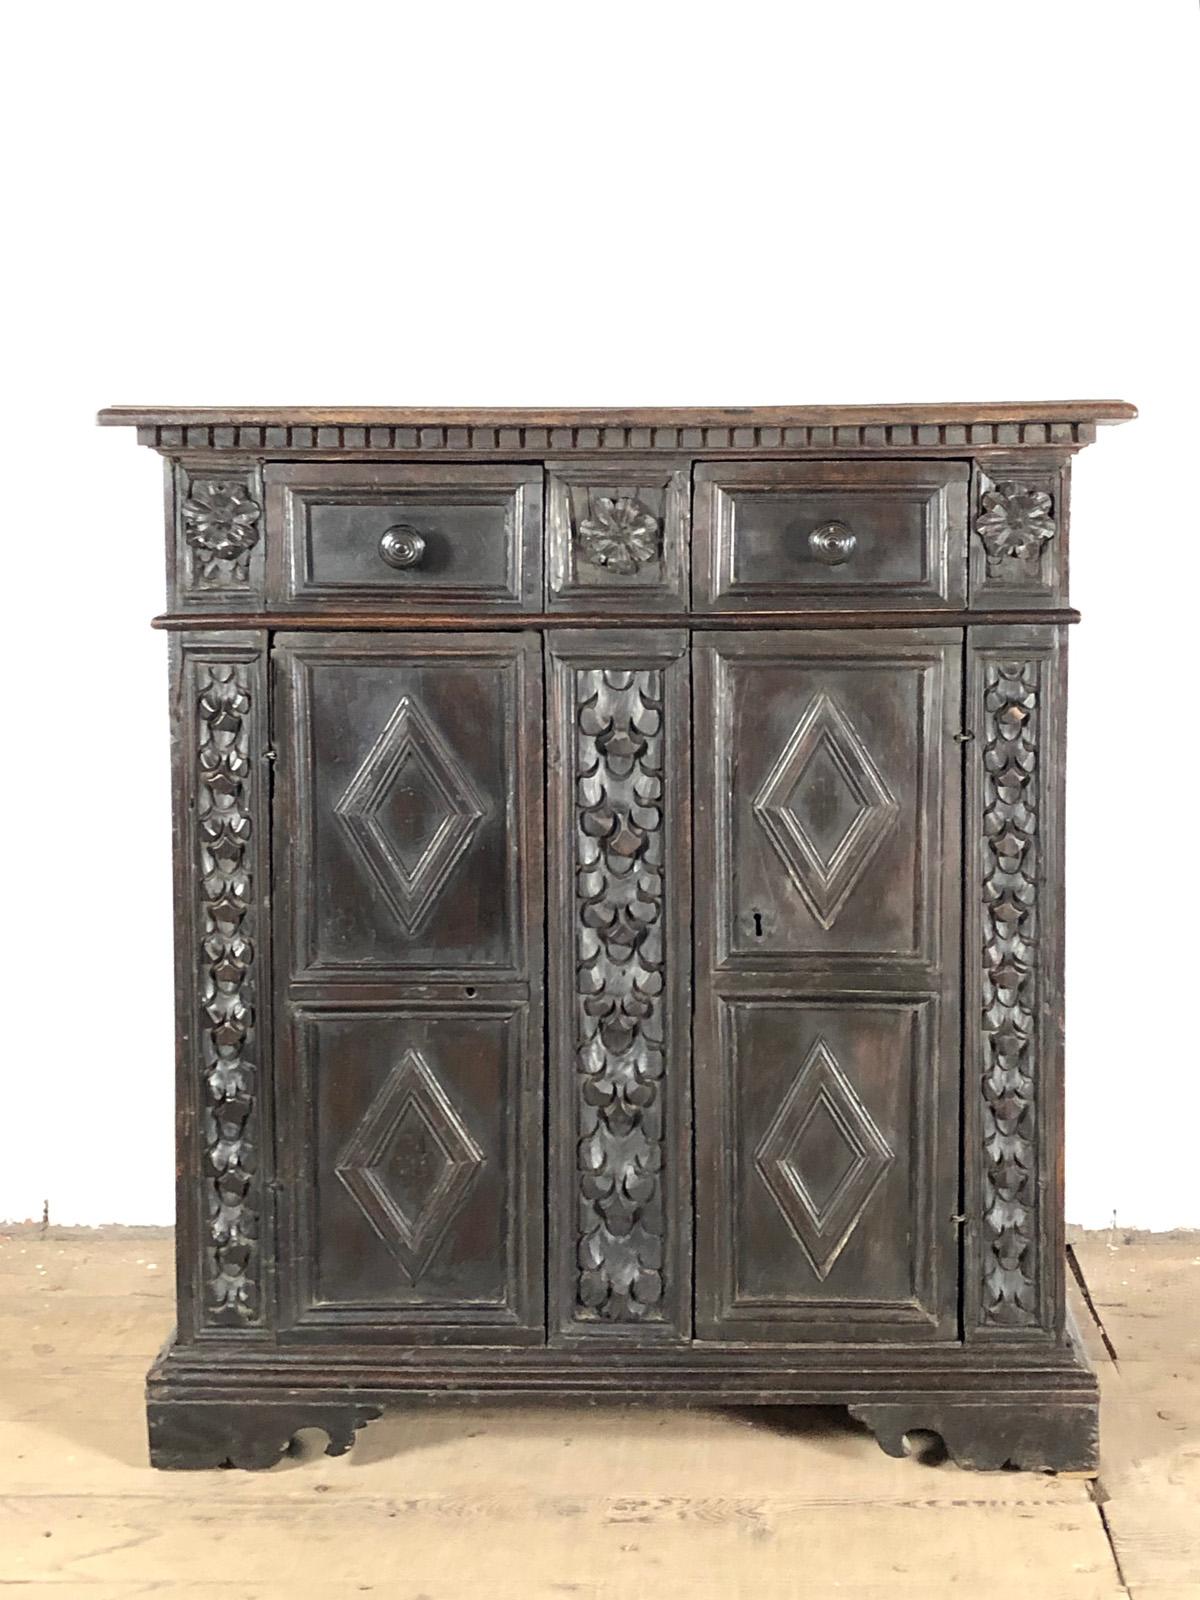 Italian 17th century Baroque walnut Credenza or Small Cabinet In Good Condition For Sale In Troy, NY